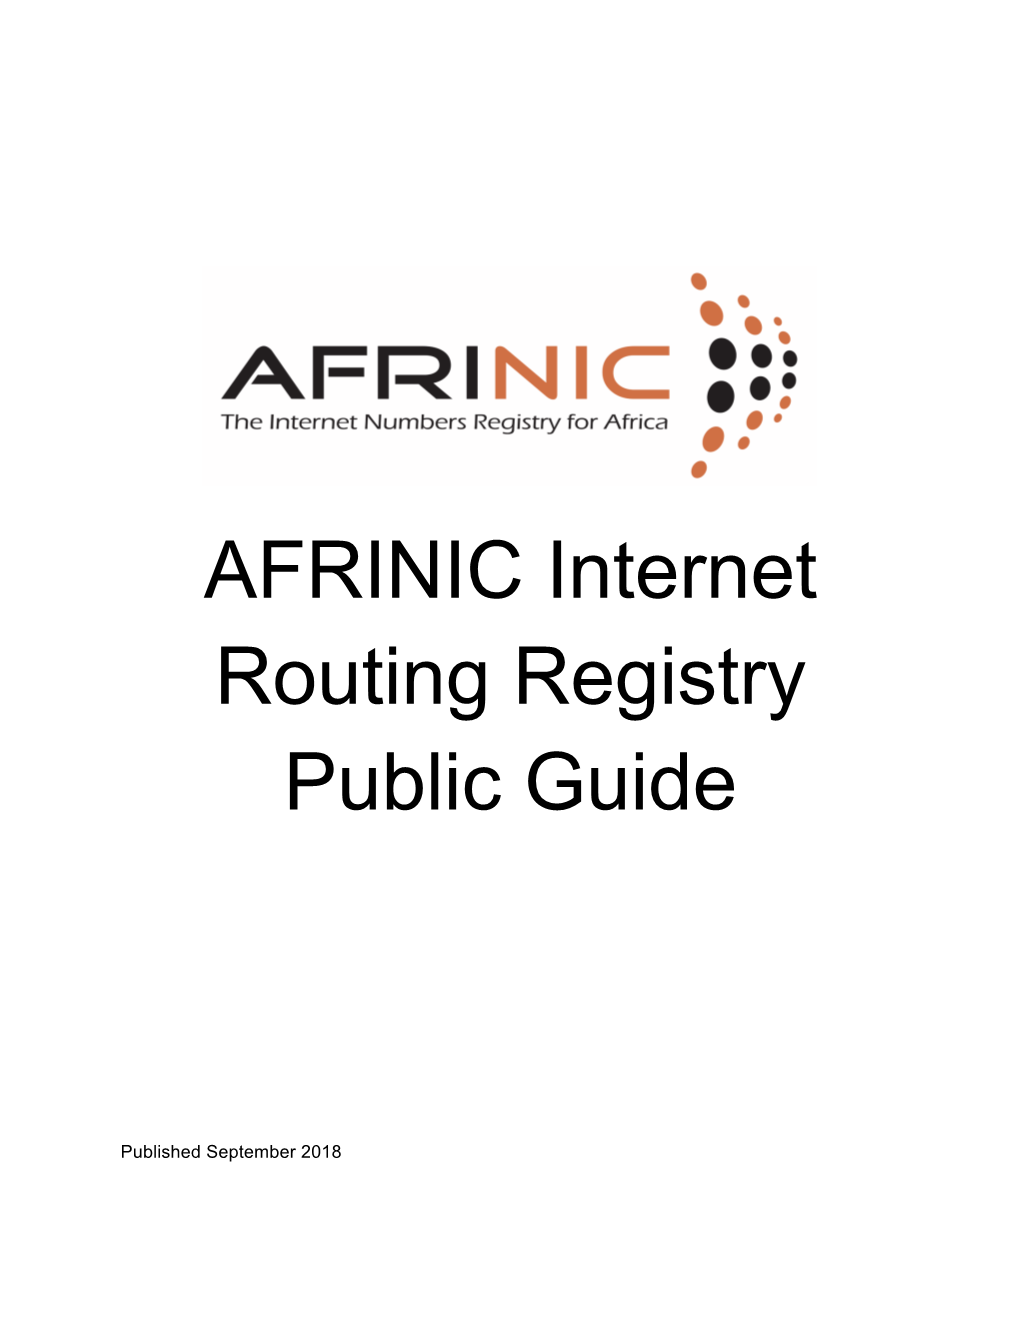 AFRINIC Internet Routing Registry Public Guide